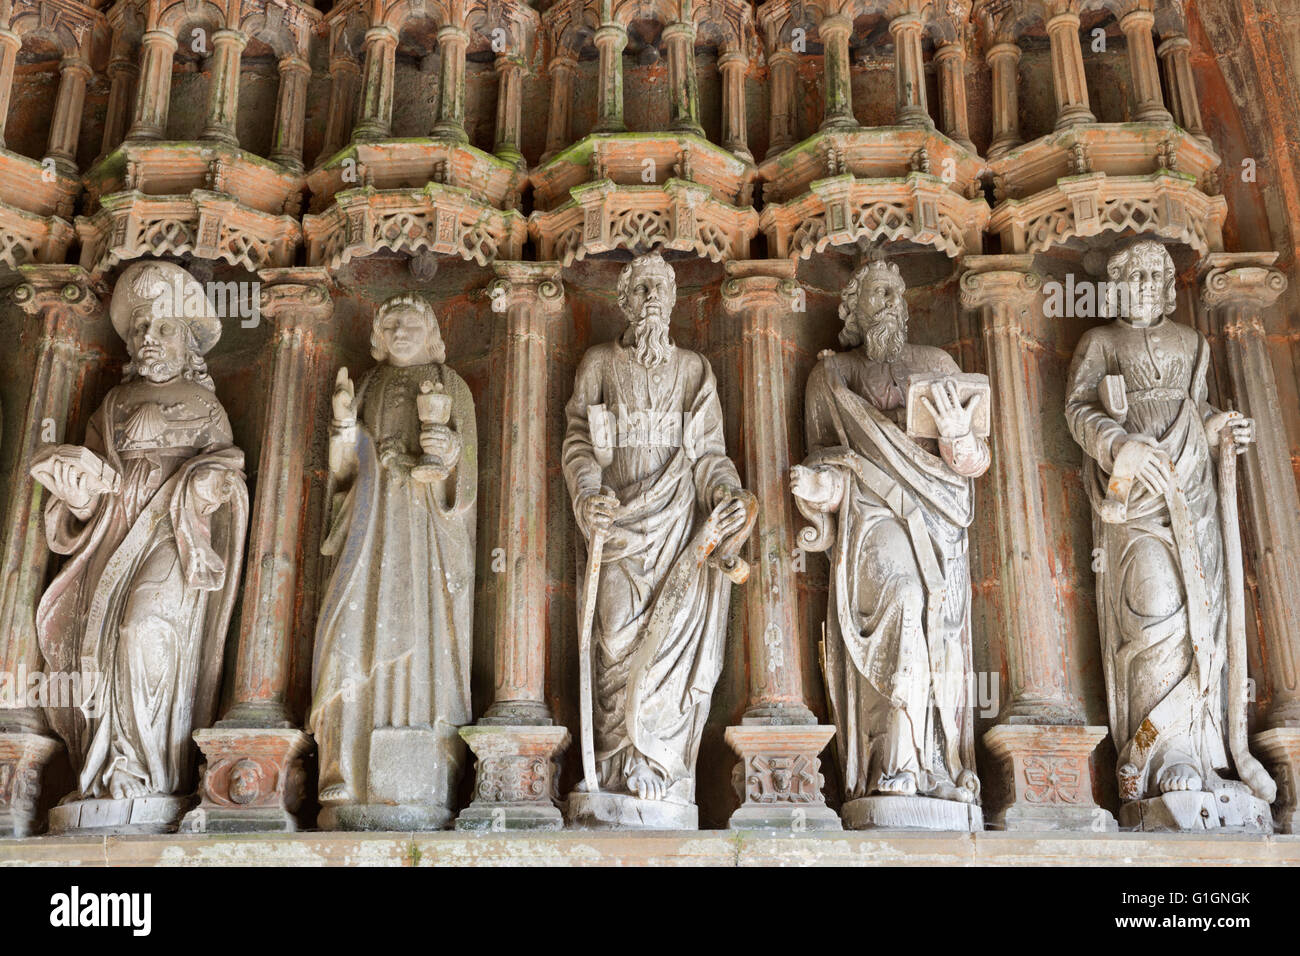 Carvings inside the porch of church, Guimiliau, Finistere, Brittany, France, Europe Stock Photo